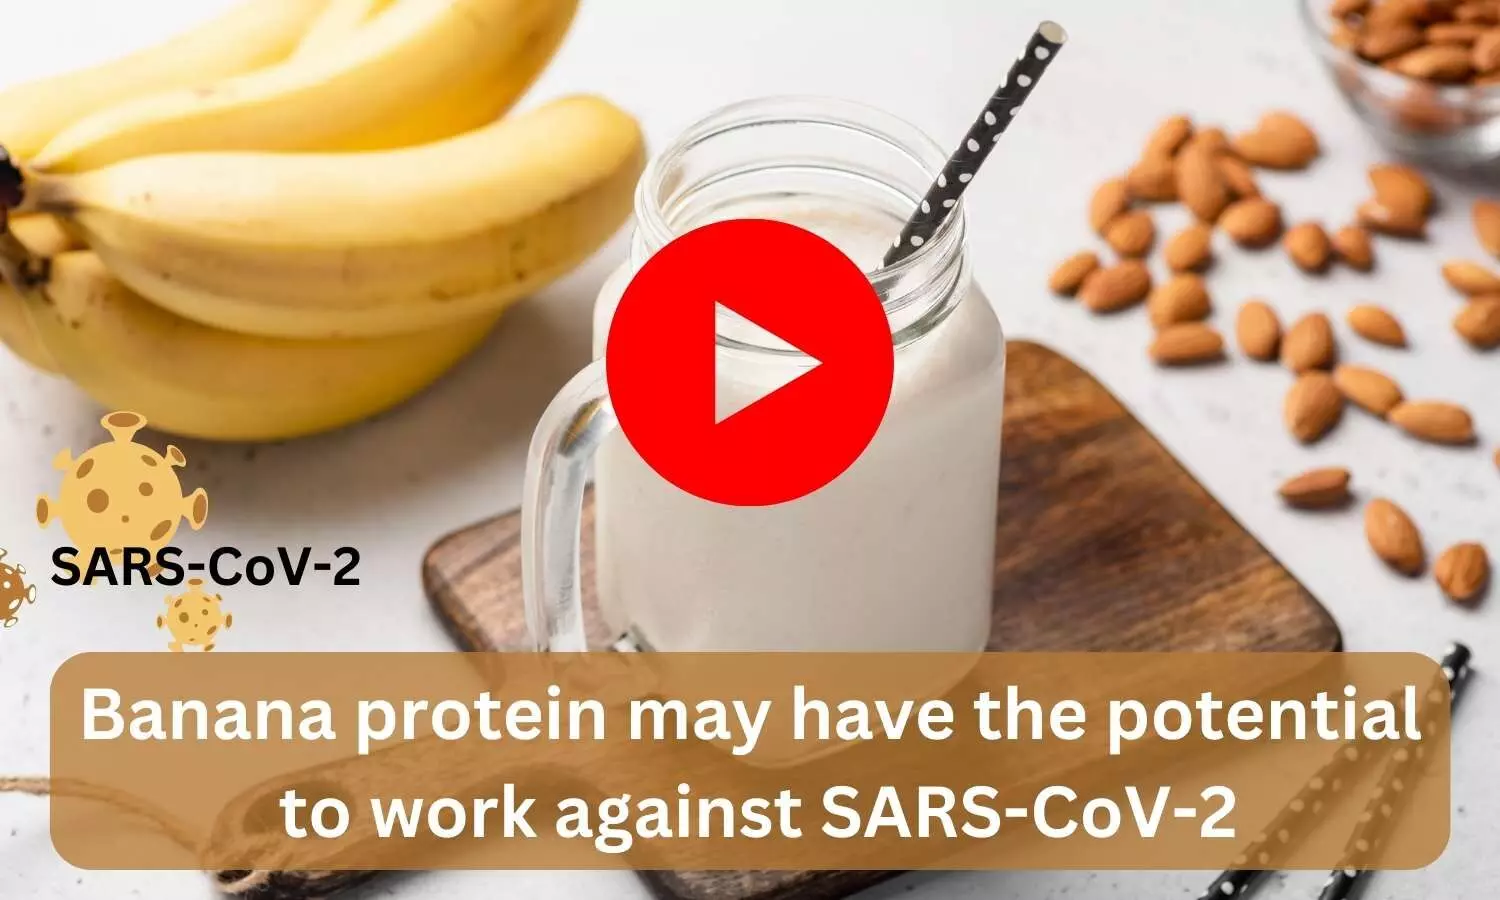 Banana protein may have the potential to work against SARS-CoV-2